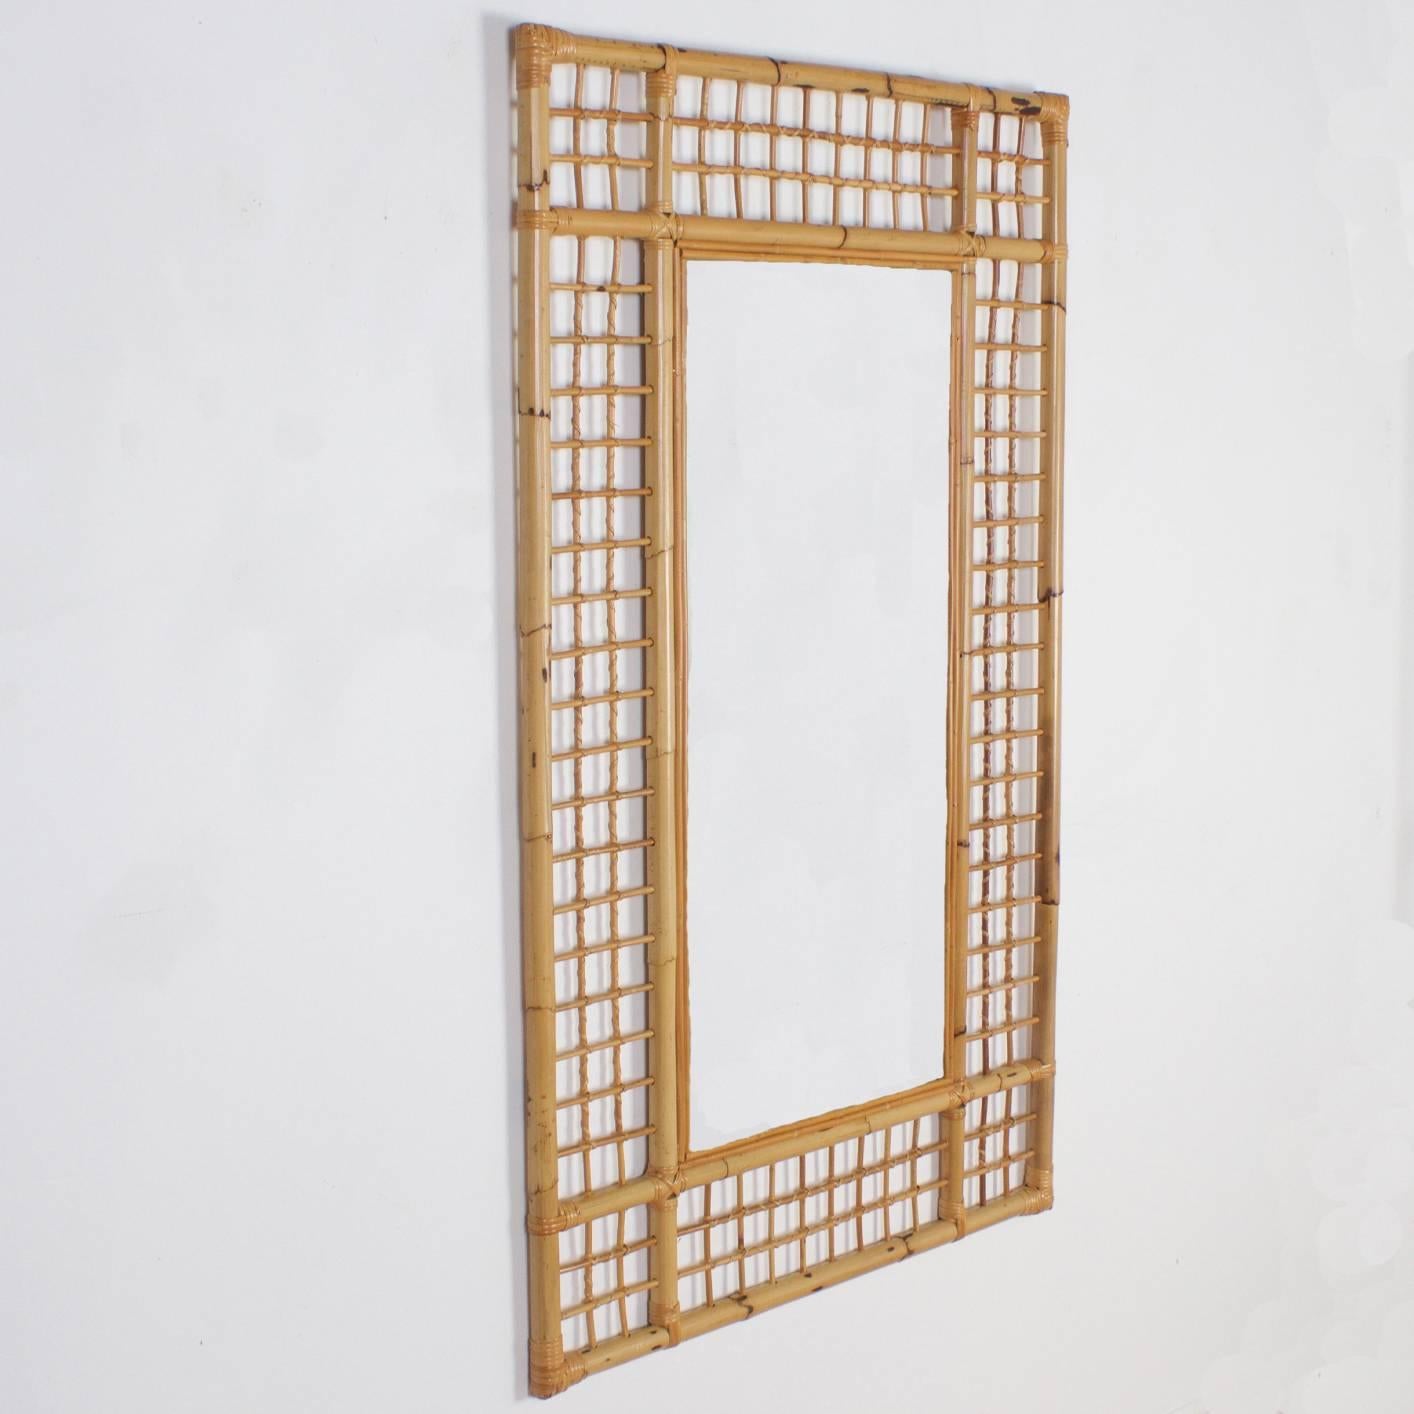 Handsome large scale Mid-Century rectangular mirror and frame crafted with bamboo and rattan, attributed to Thayer Coggin, featuring a strong no nonsense geometric design. Perfect for an Island, coastal or any vibe that deserves a hip tropical